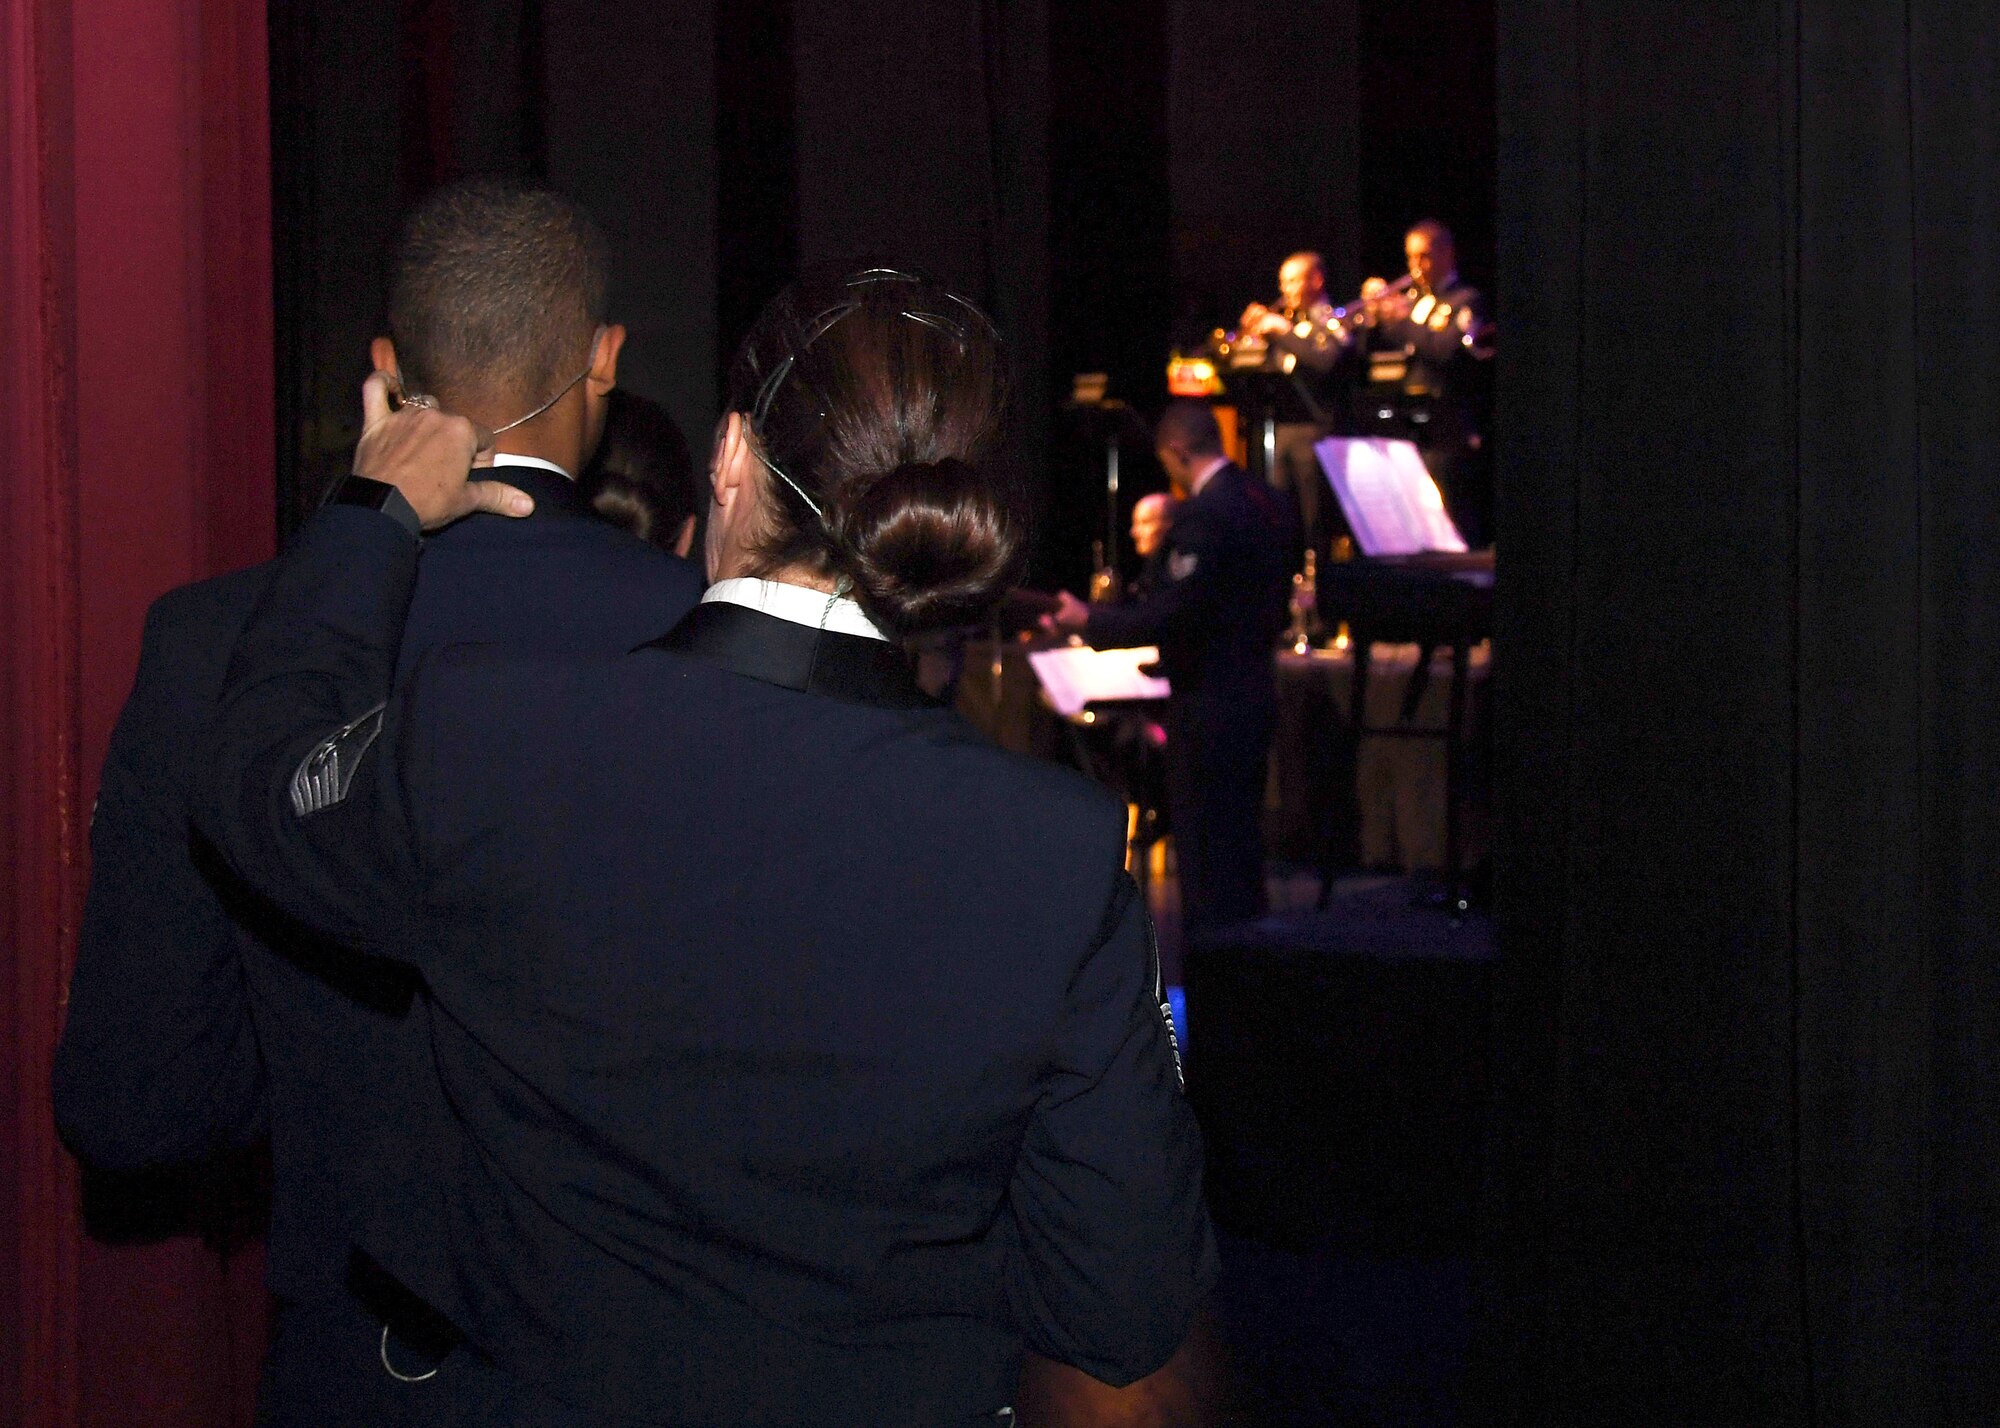 Master Sgt. Rebecca Wischmann, vocalist with the U.S. Air Force Heartland of America Band, adjusts Airman 1st Class Mario Foreman-Powell’s collar, a fellow vocalist in the band, prior to heading onstage for a concert November 6, 2018, at the Chester Fritz Auditorium in Grand Forks, North Dakota. The Heartland of America Band held a special Veterans Day performance to commemorate and celebrate all service members, past and present. (U.S. Air Force photo by Airman 1st Class Elora J. Martinez)